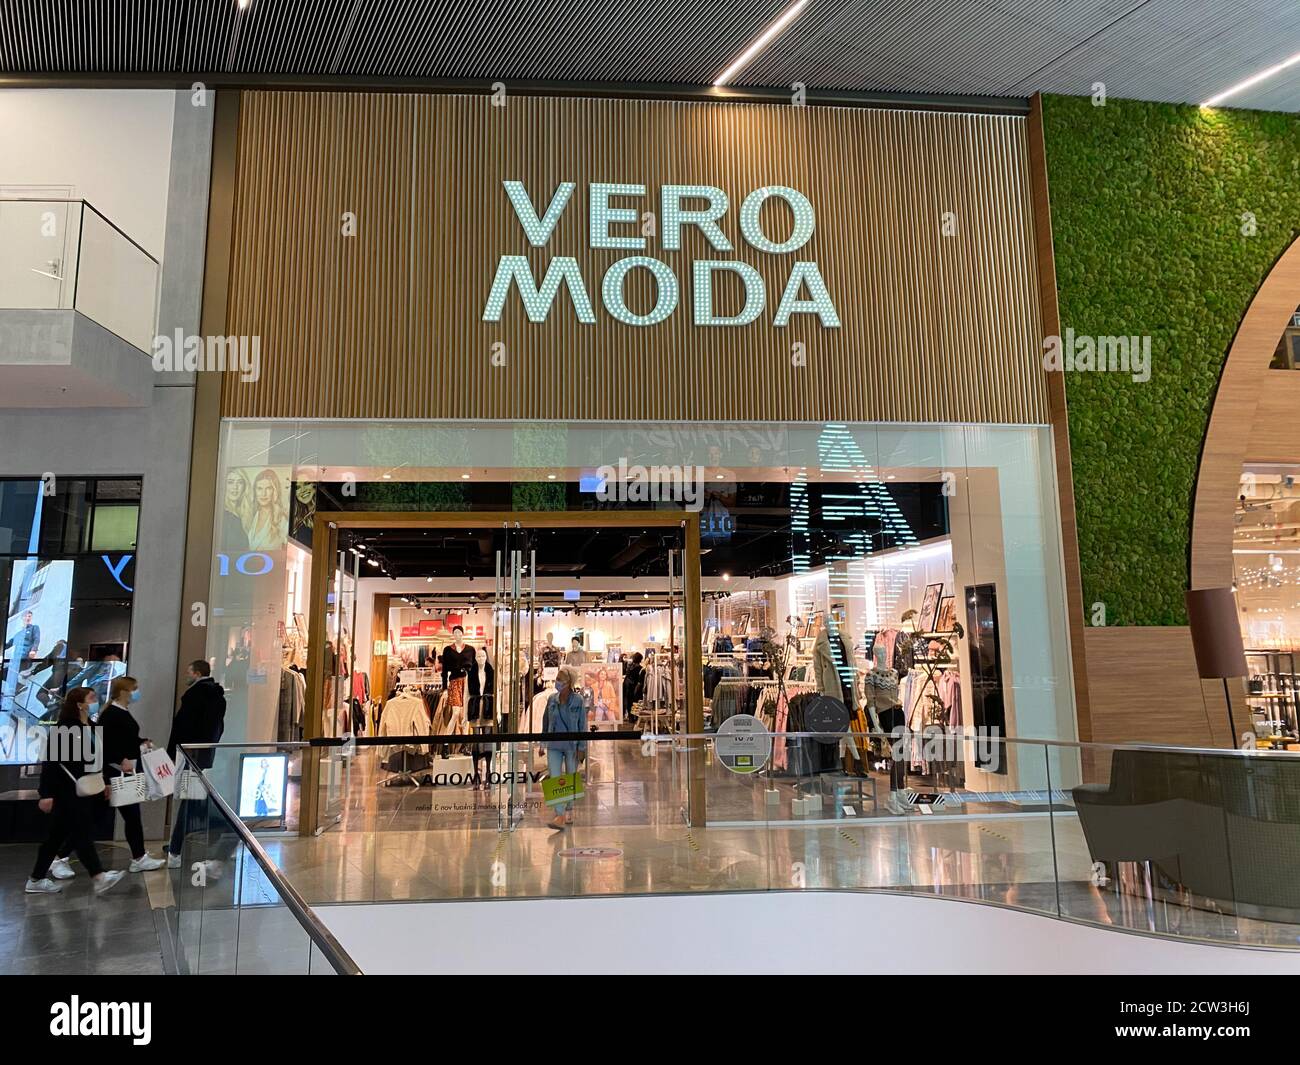 Moda Mall High Resolution Stock Photography and Images - Alamy